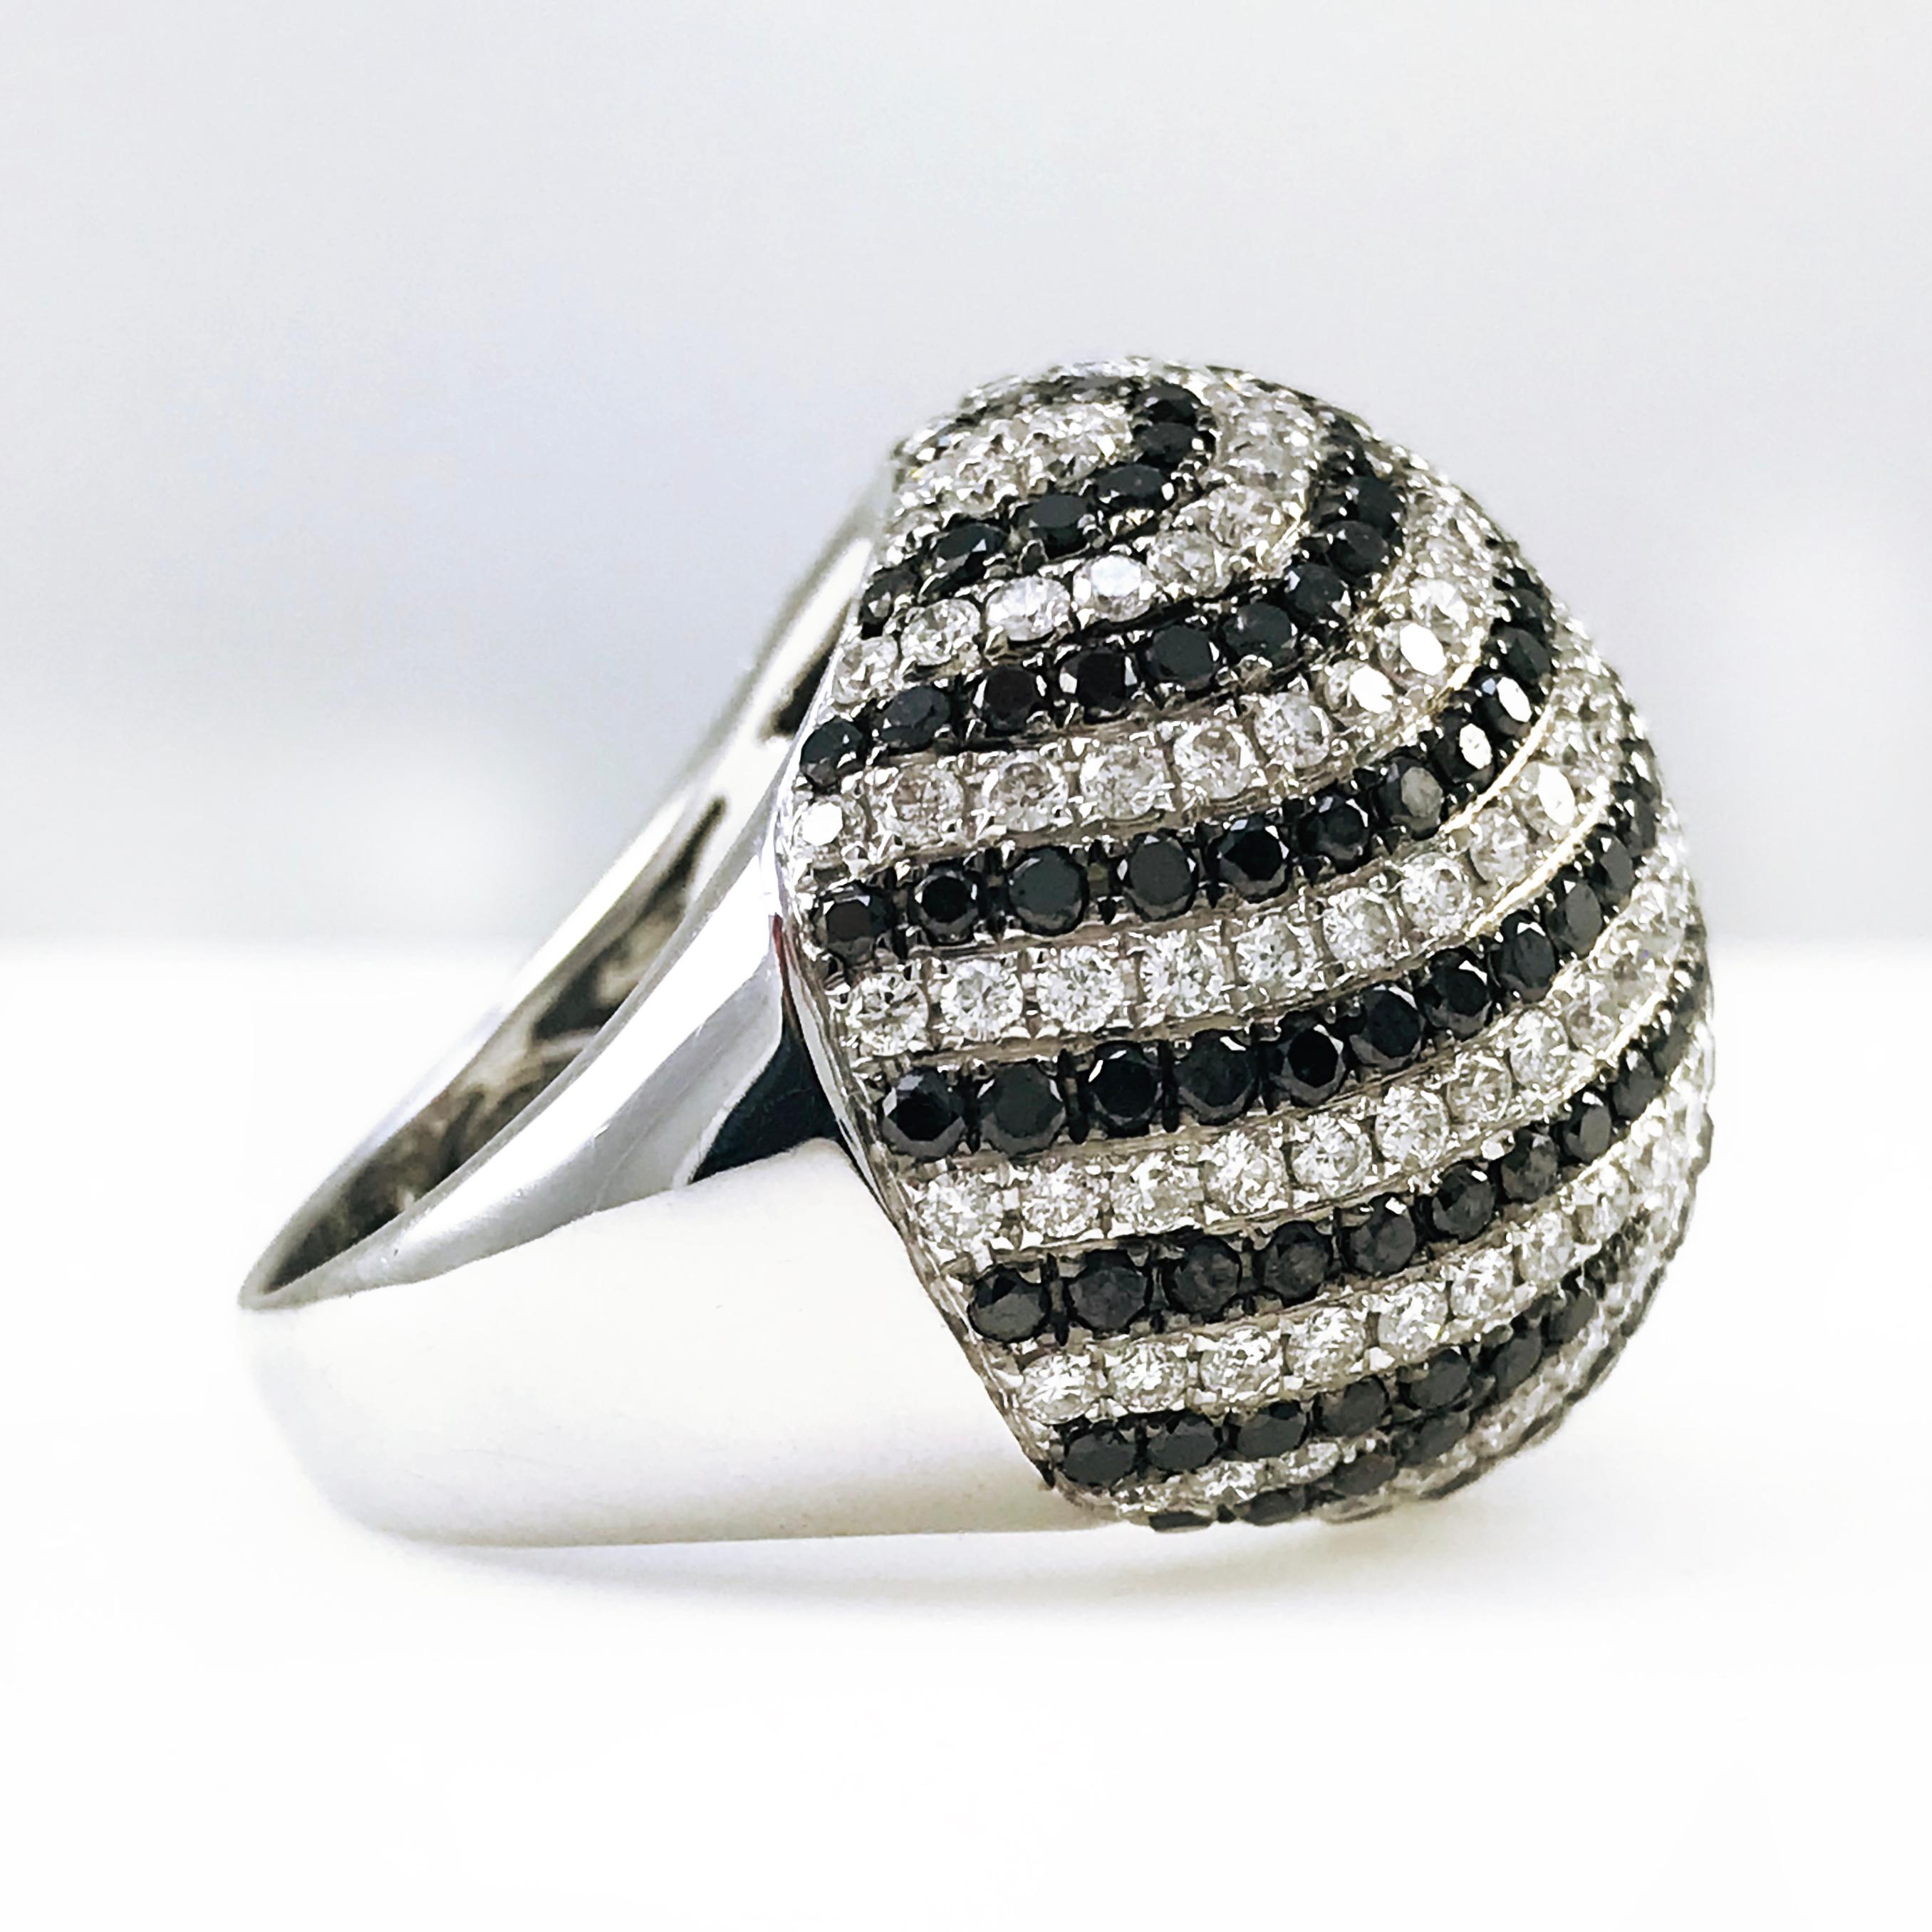 Stunning 18 Karat White Gold, Black and White Pave Set Diamond Dome Cocktail Ring. Rows of semi-circles of white and black round diamonds adorn this significant-sized ring making it a true statement piece. Not to be outdone by the sparkling pave-set